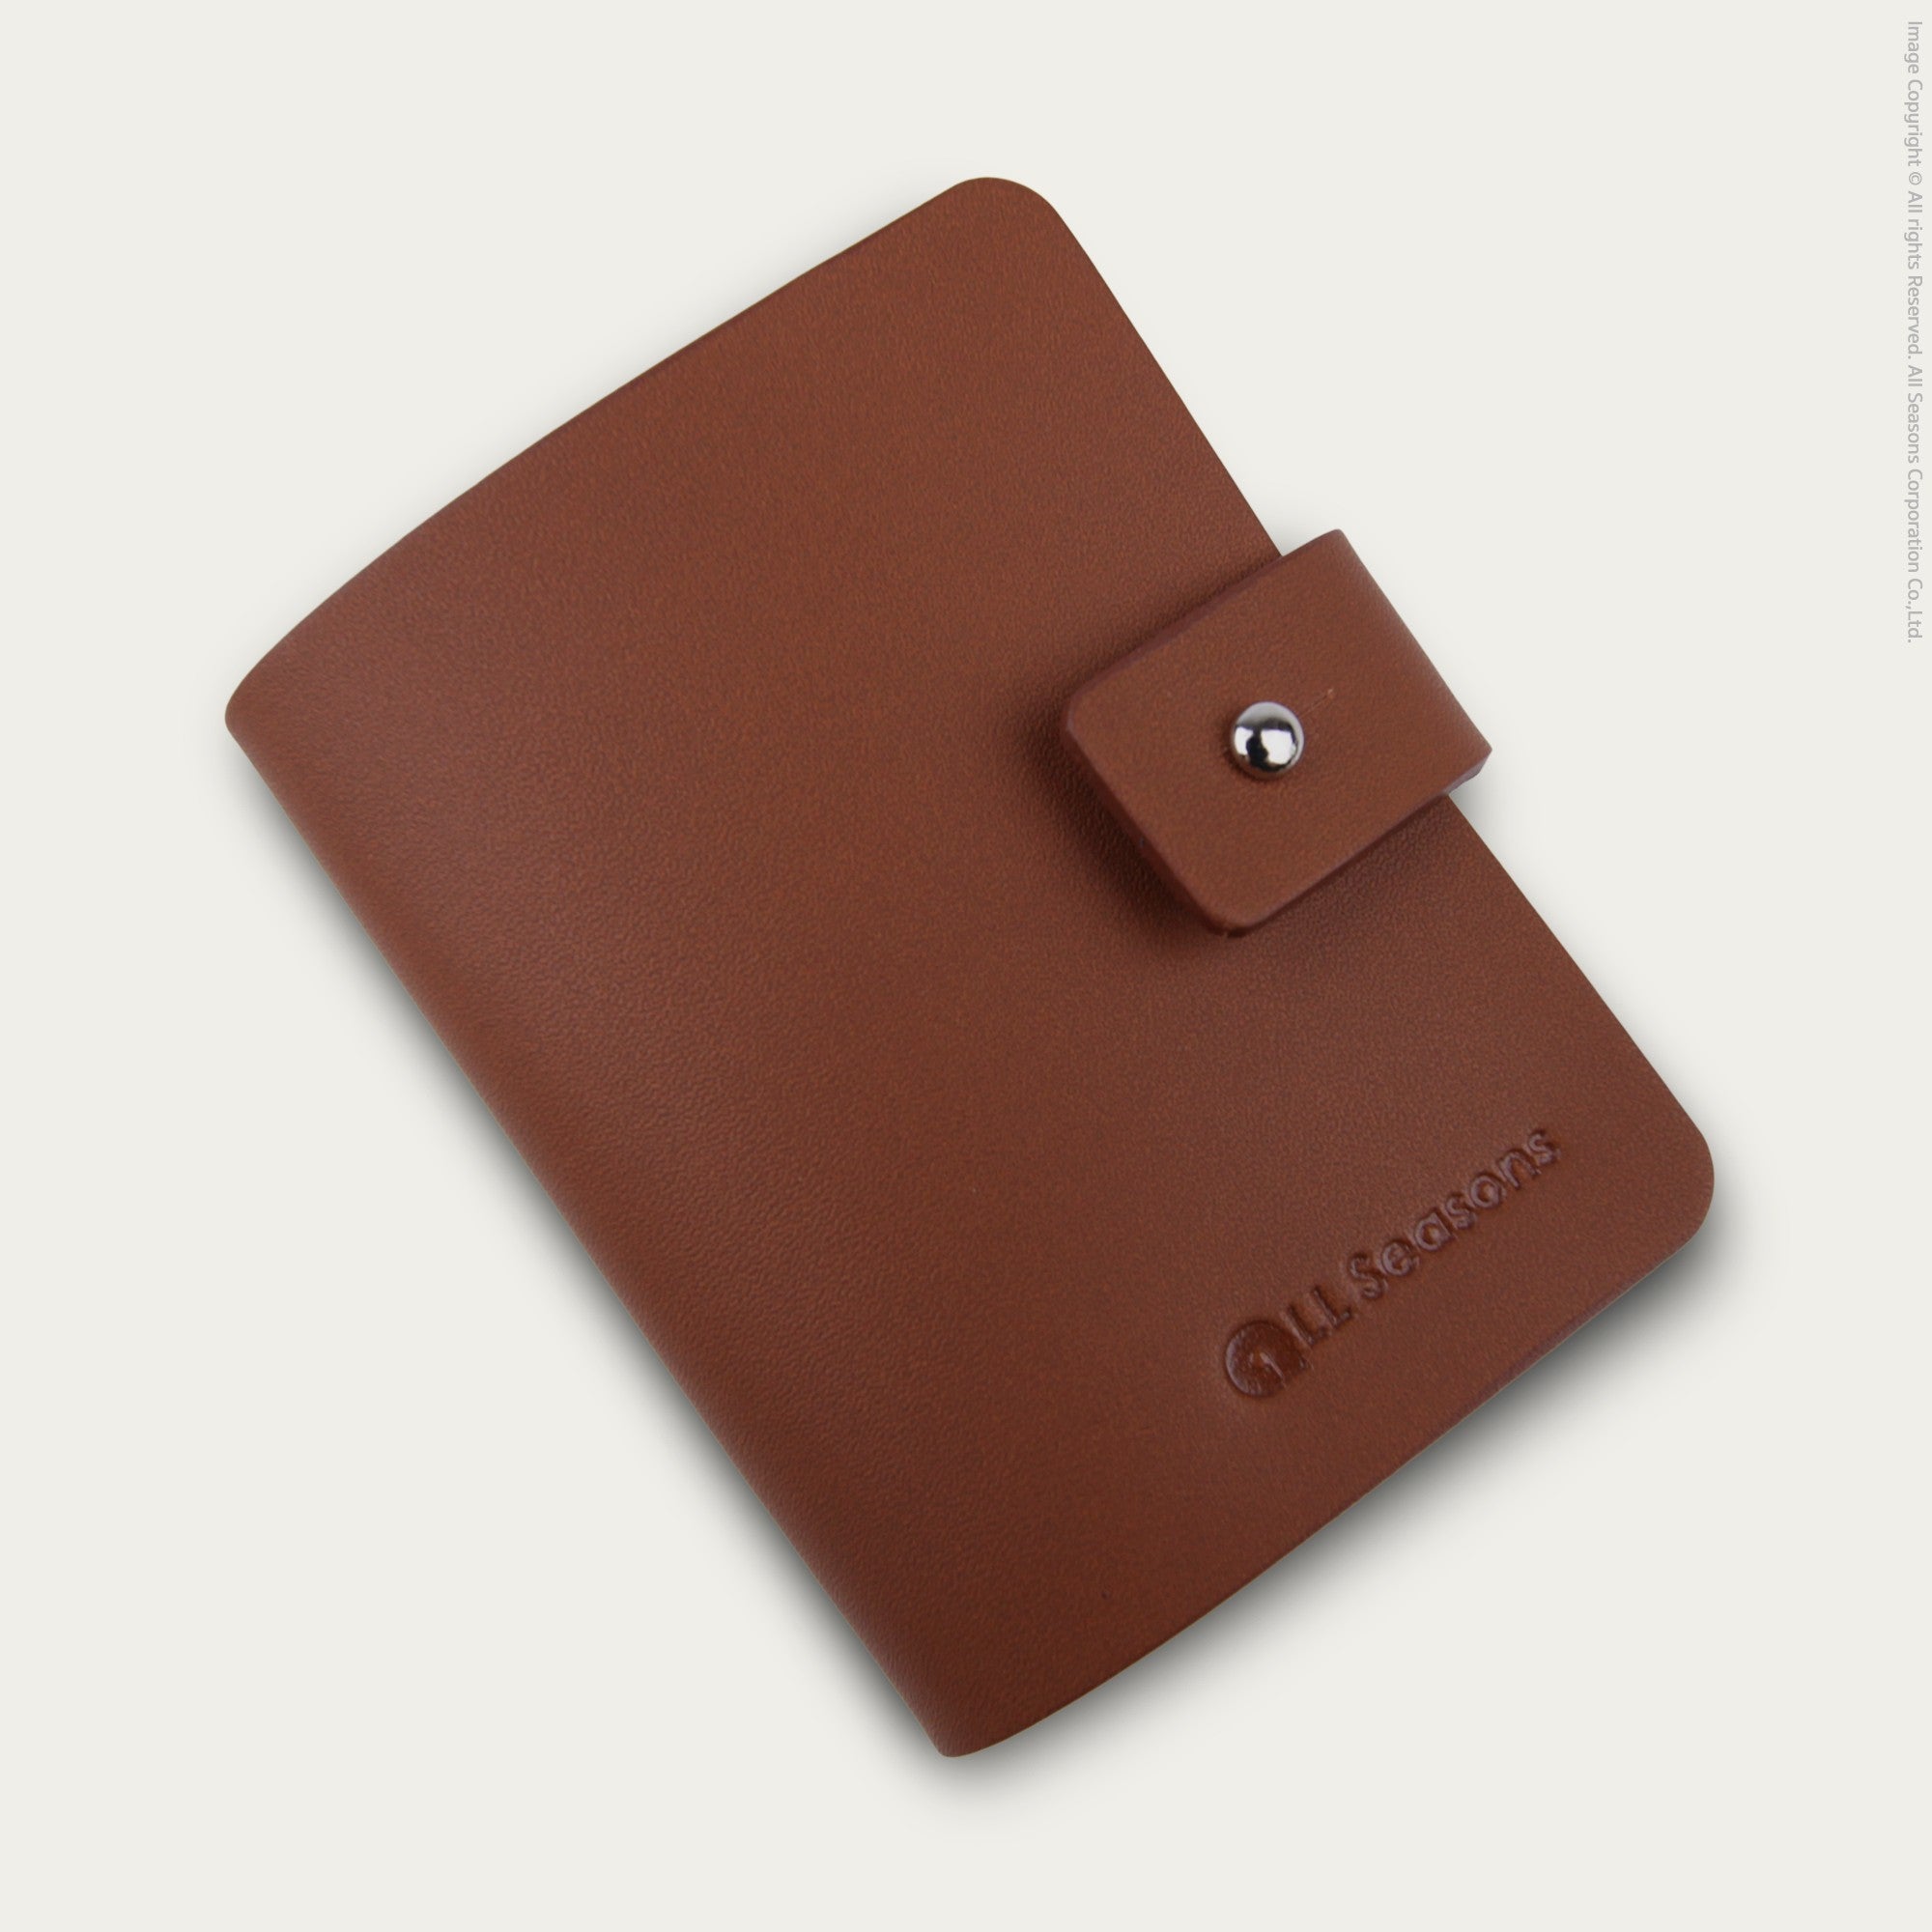 Leather Bi-fold Card Cover. Personalized your name.